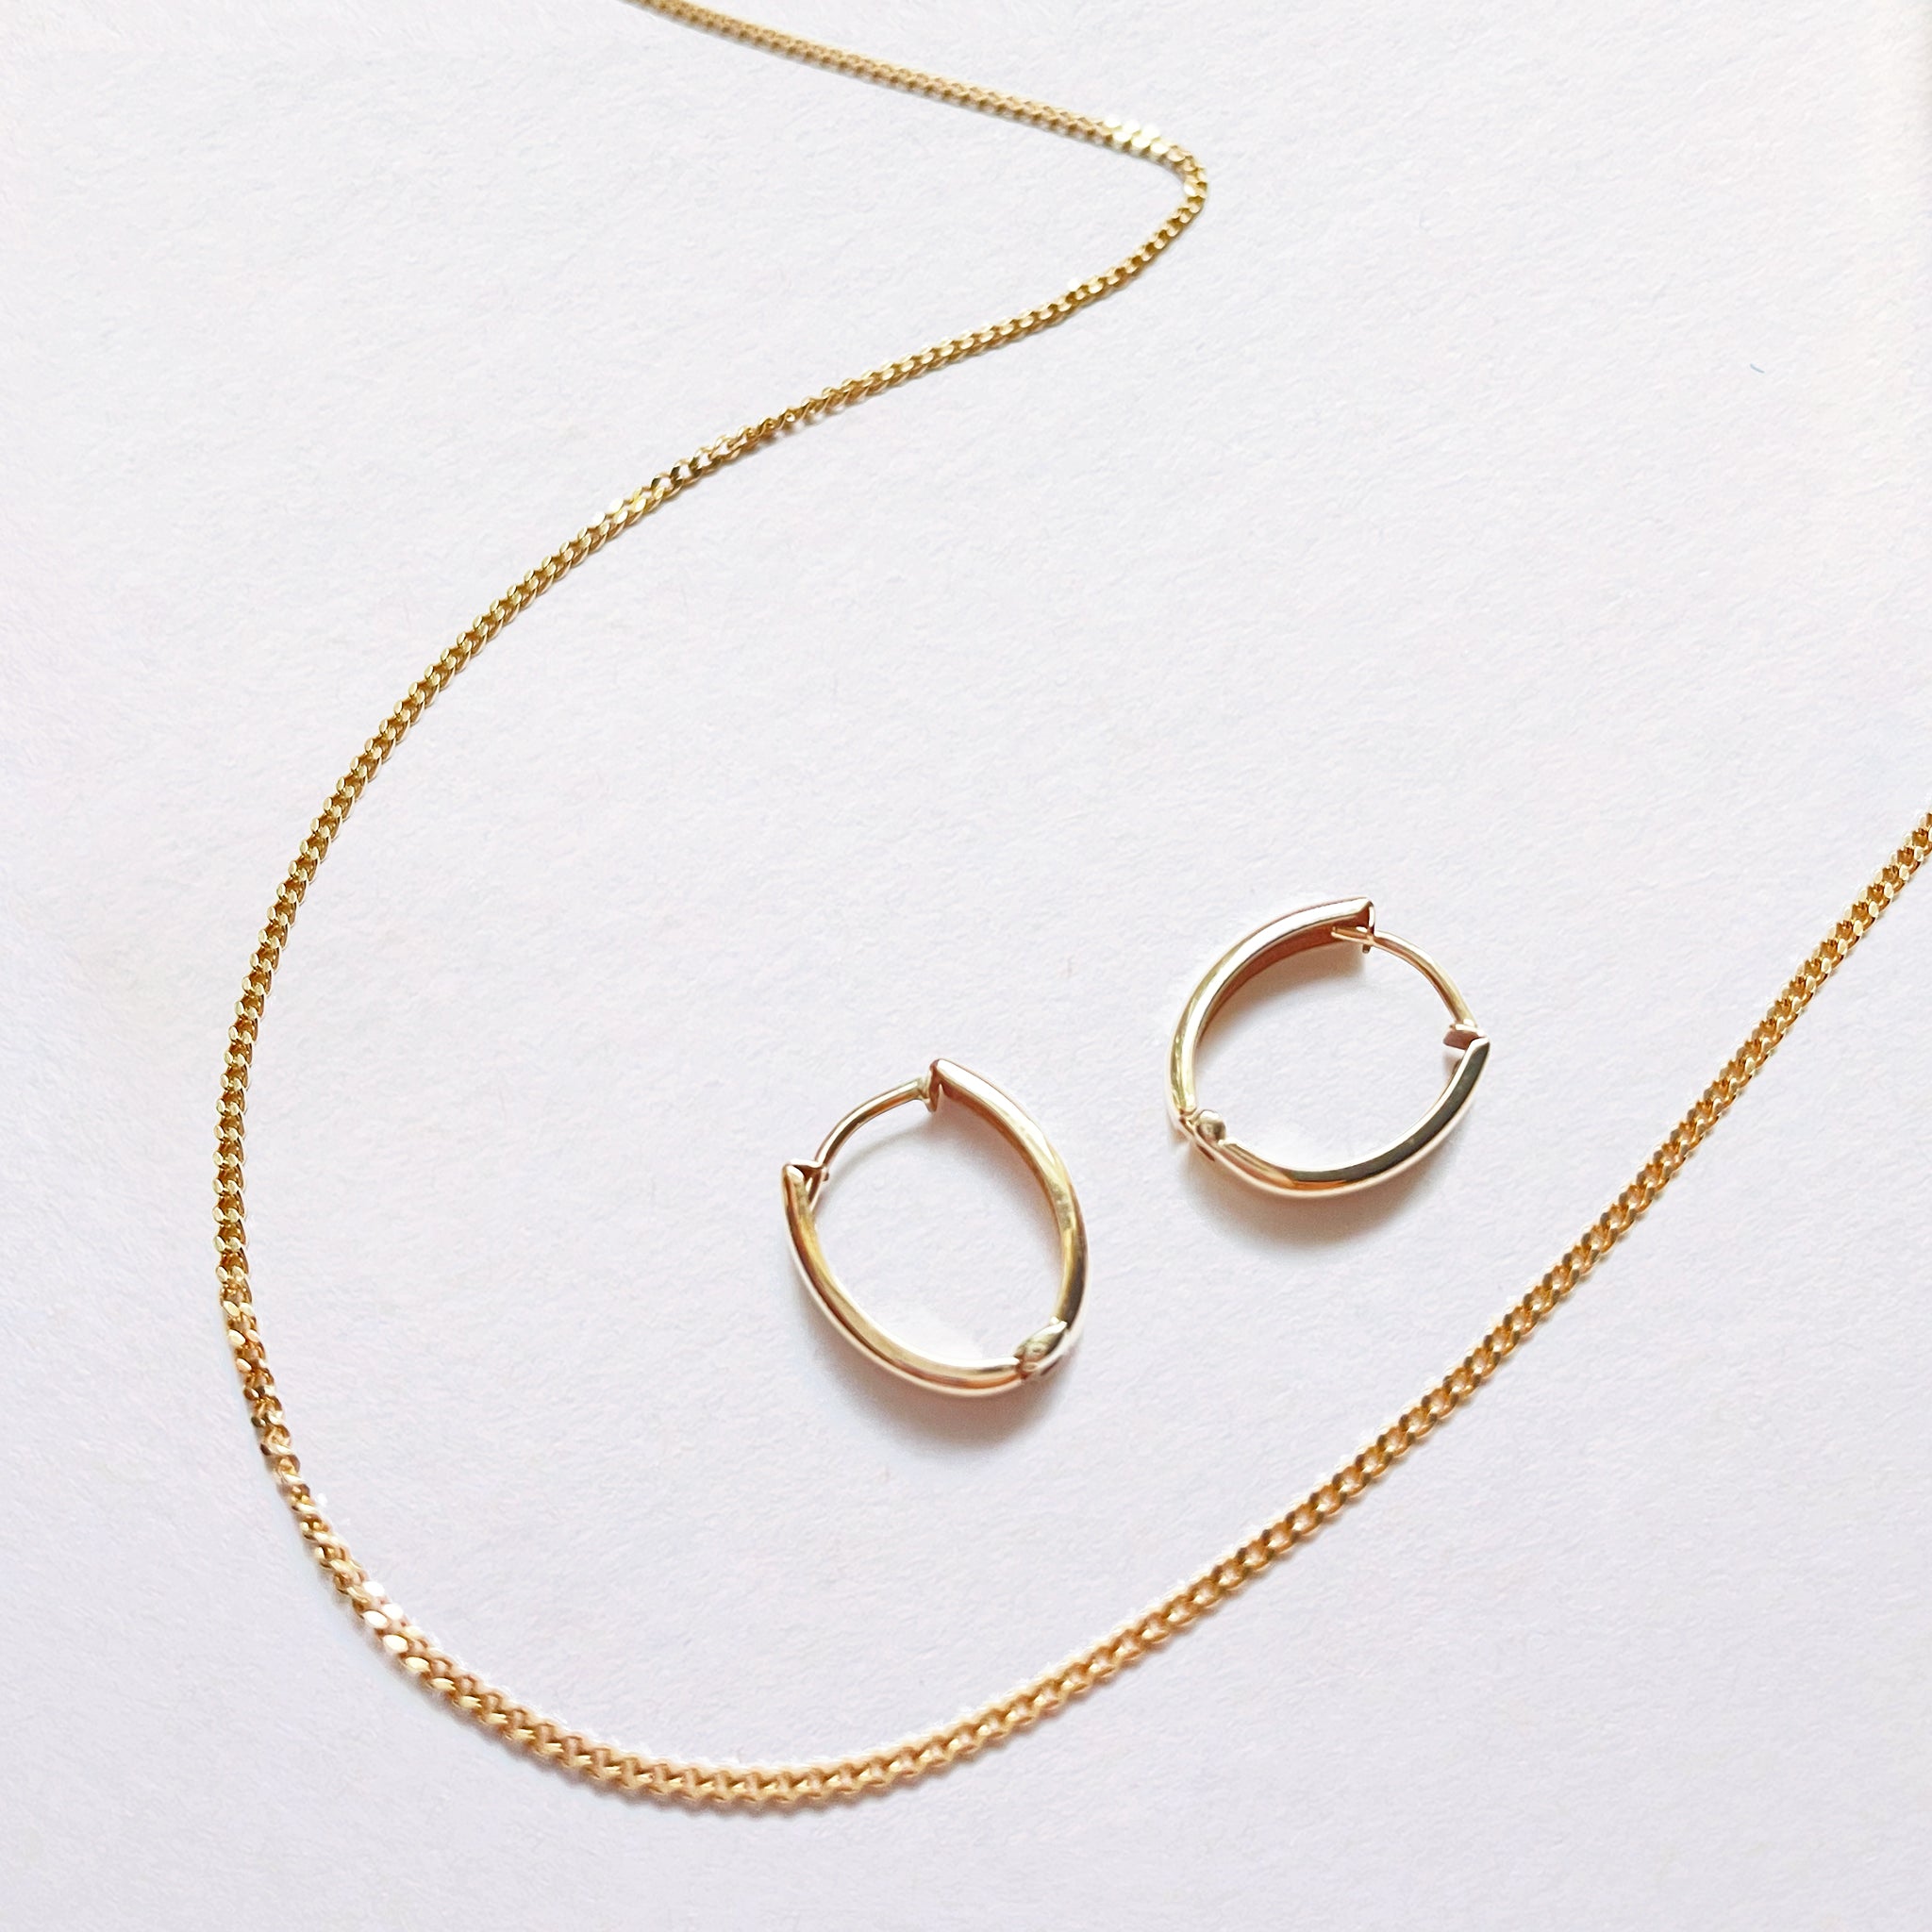 solid gold huggie hoop earrings and embrace curb chain necklace - AïANA jewellery Australia